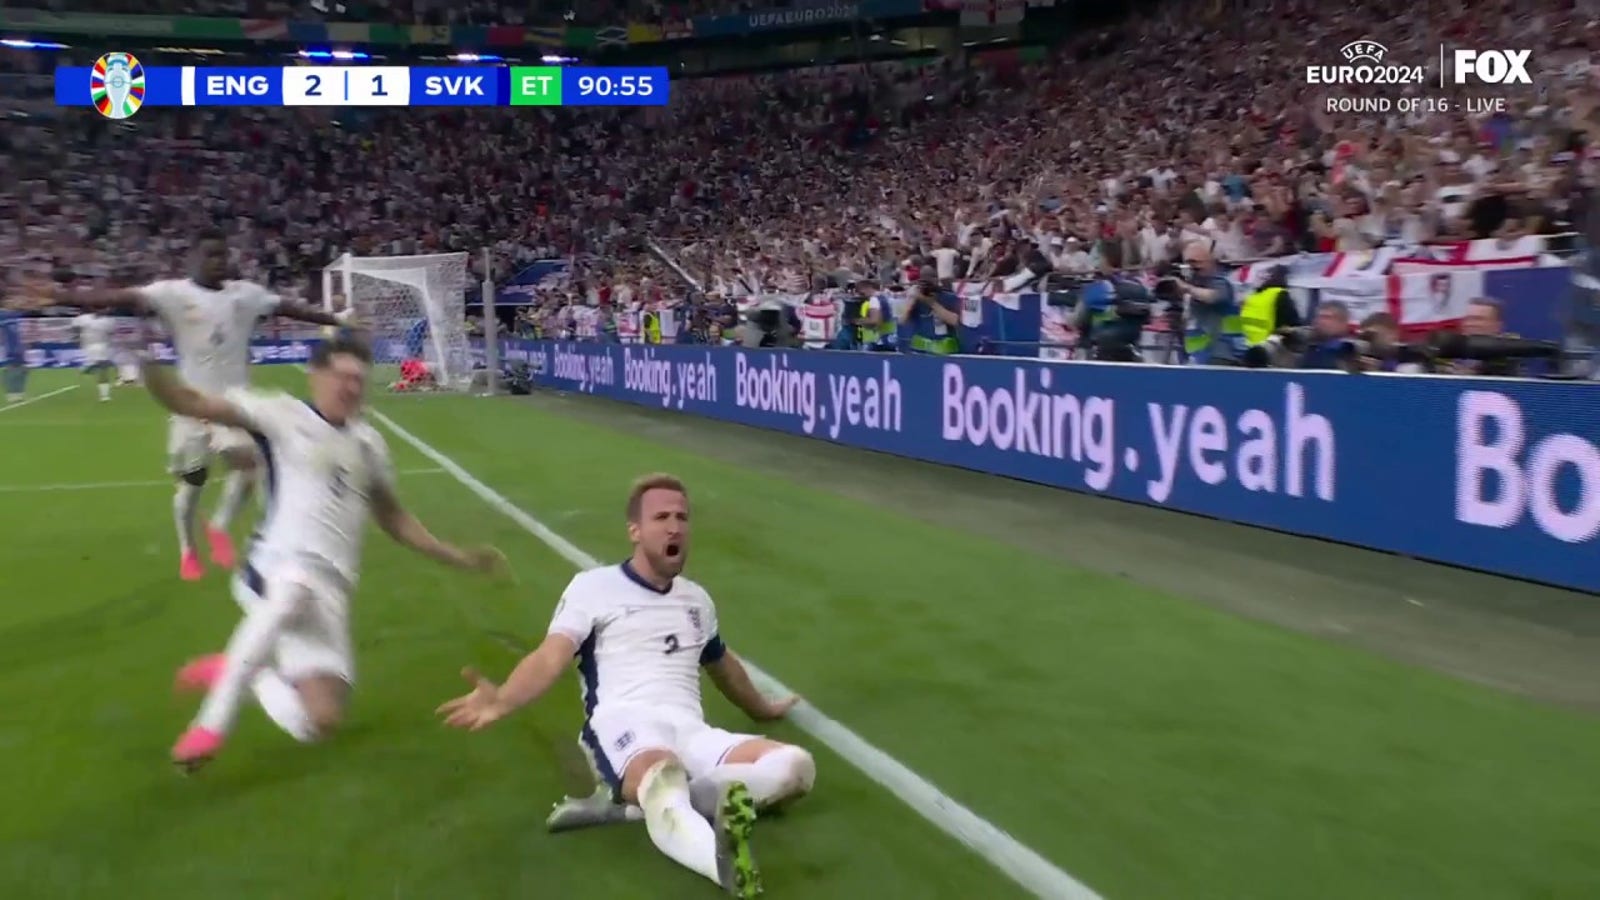 Harry Kane scores in extra time as England takes a 2-1 lead over Slovakia